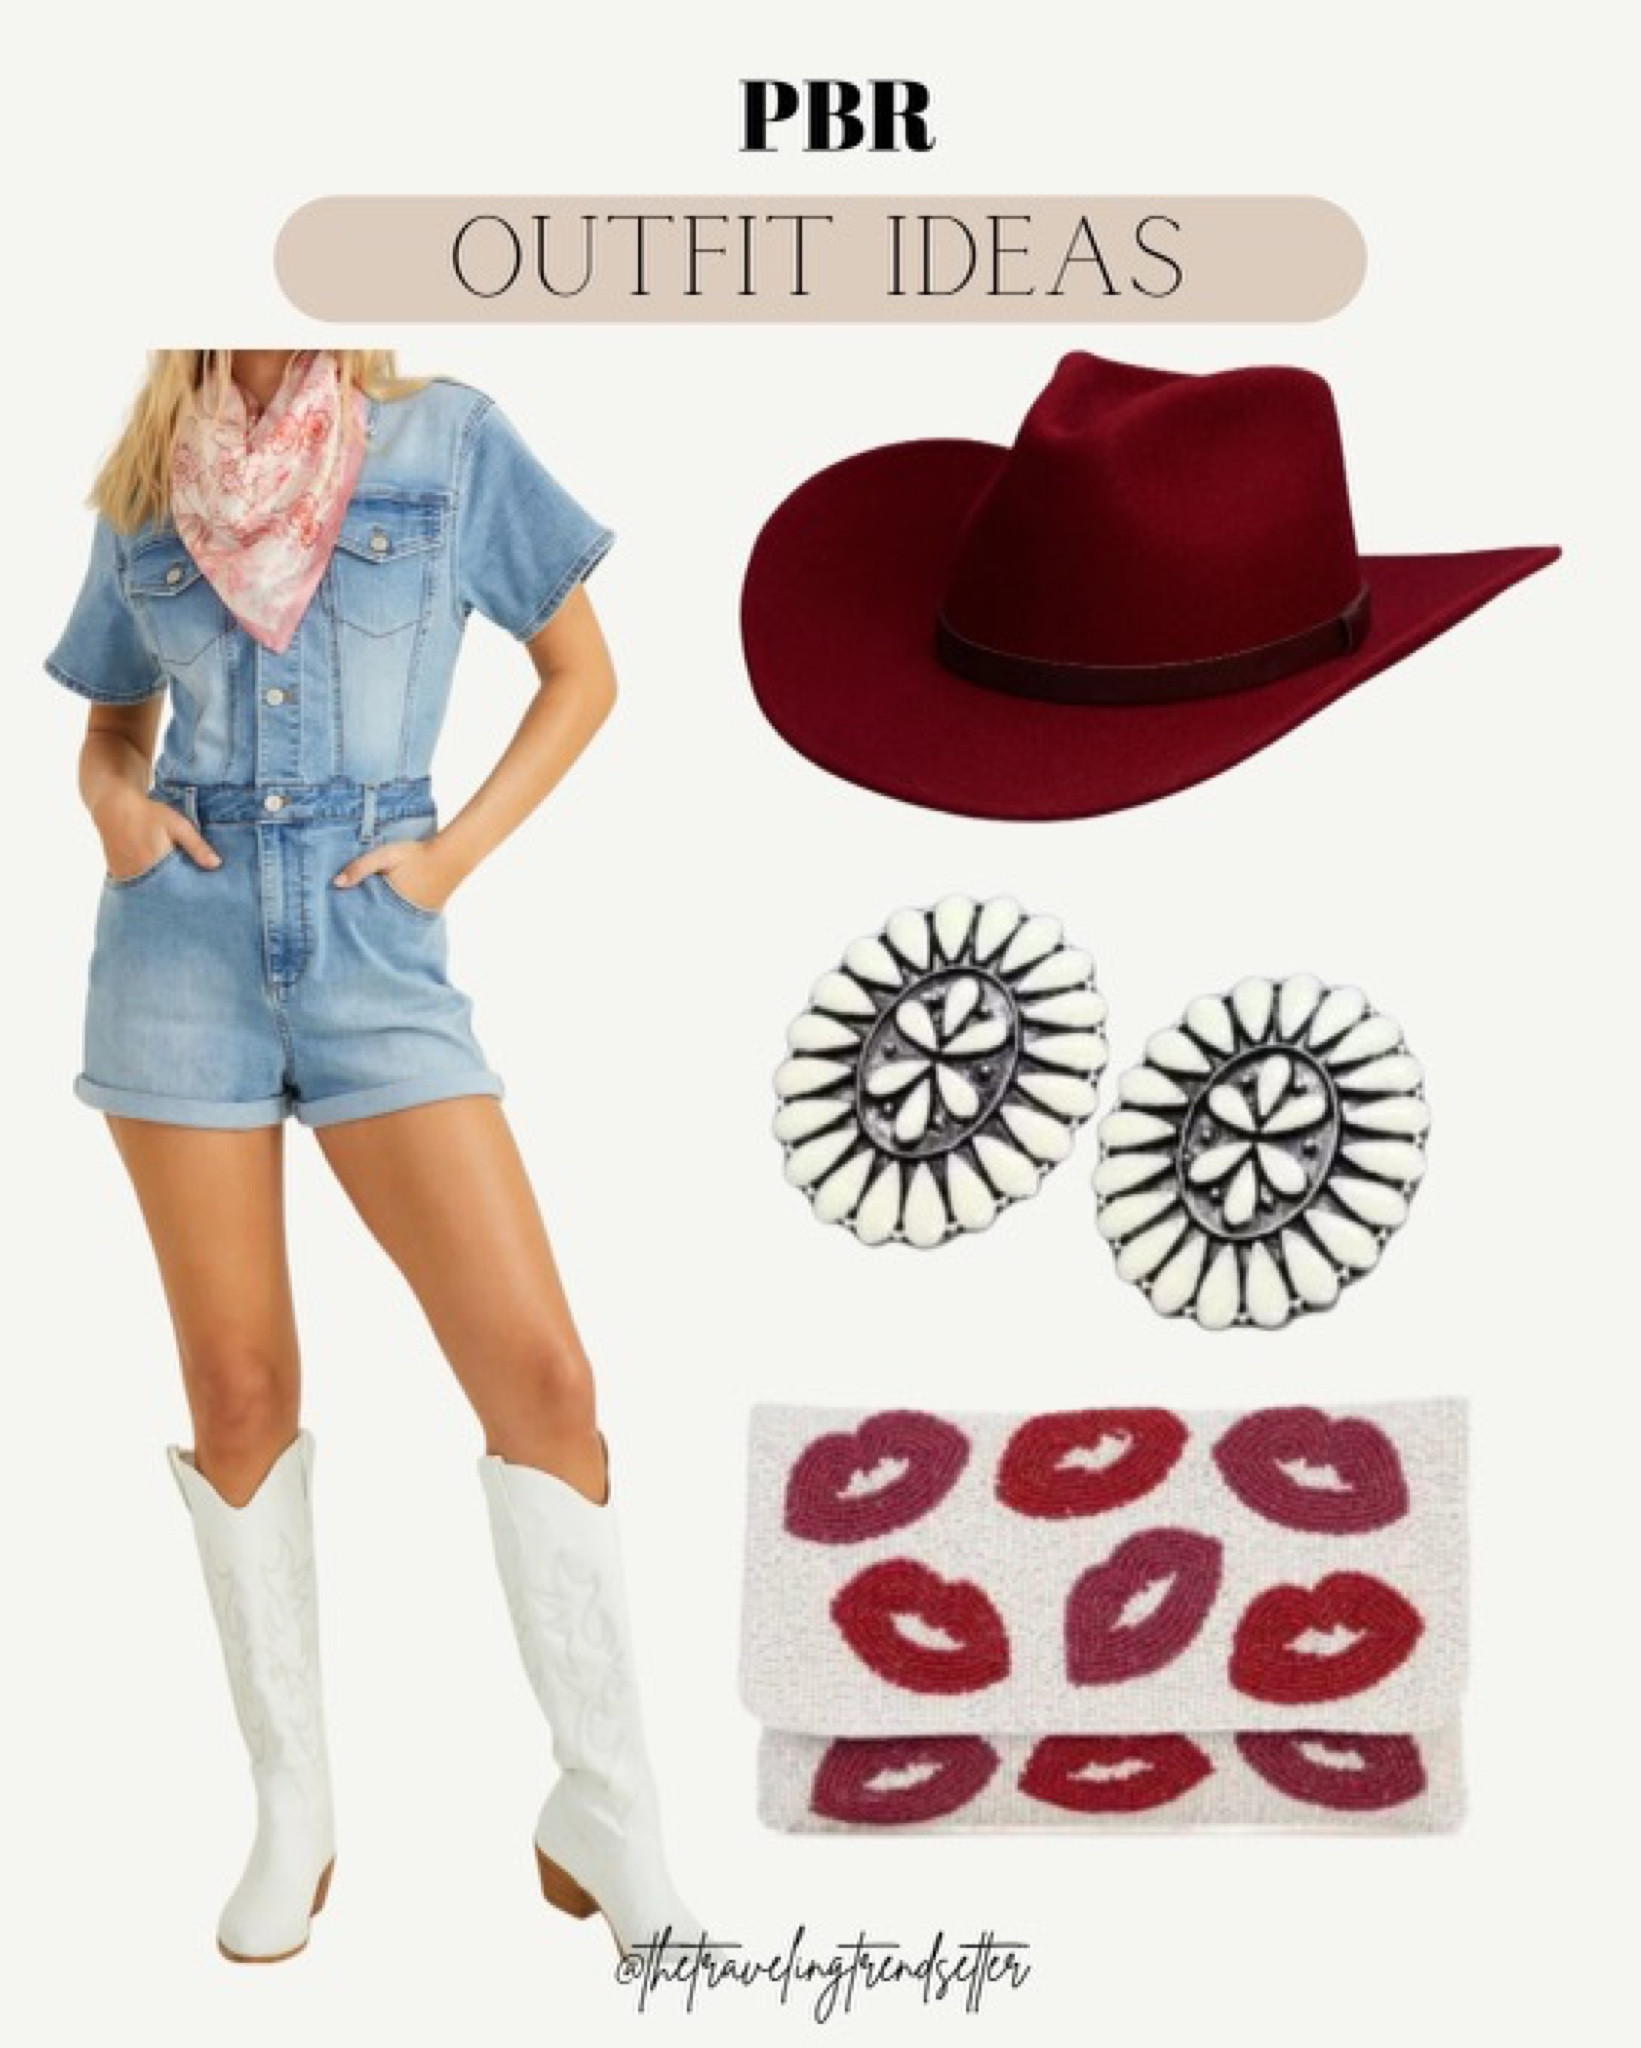 bb outfit ideas